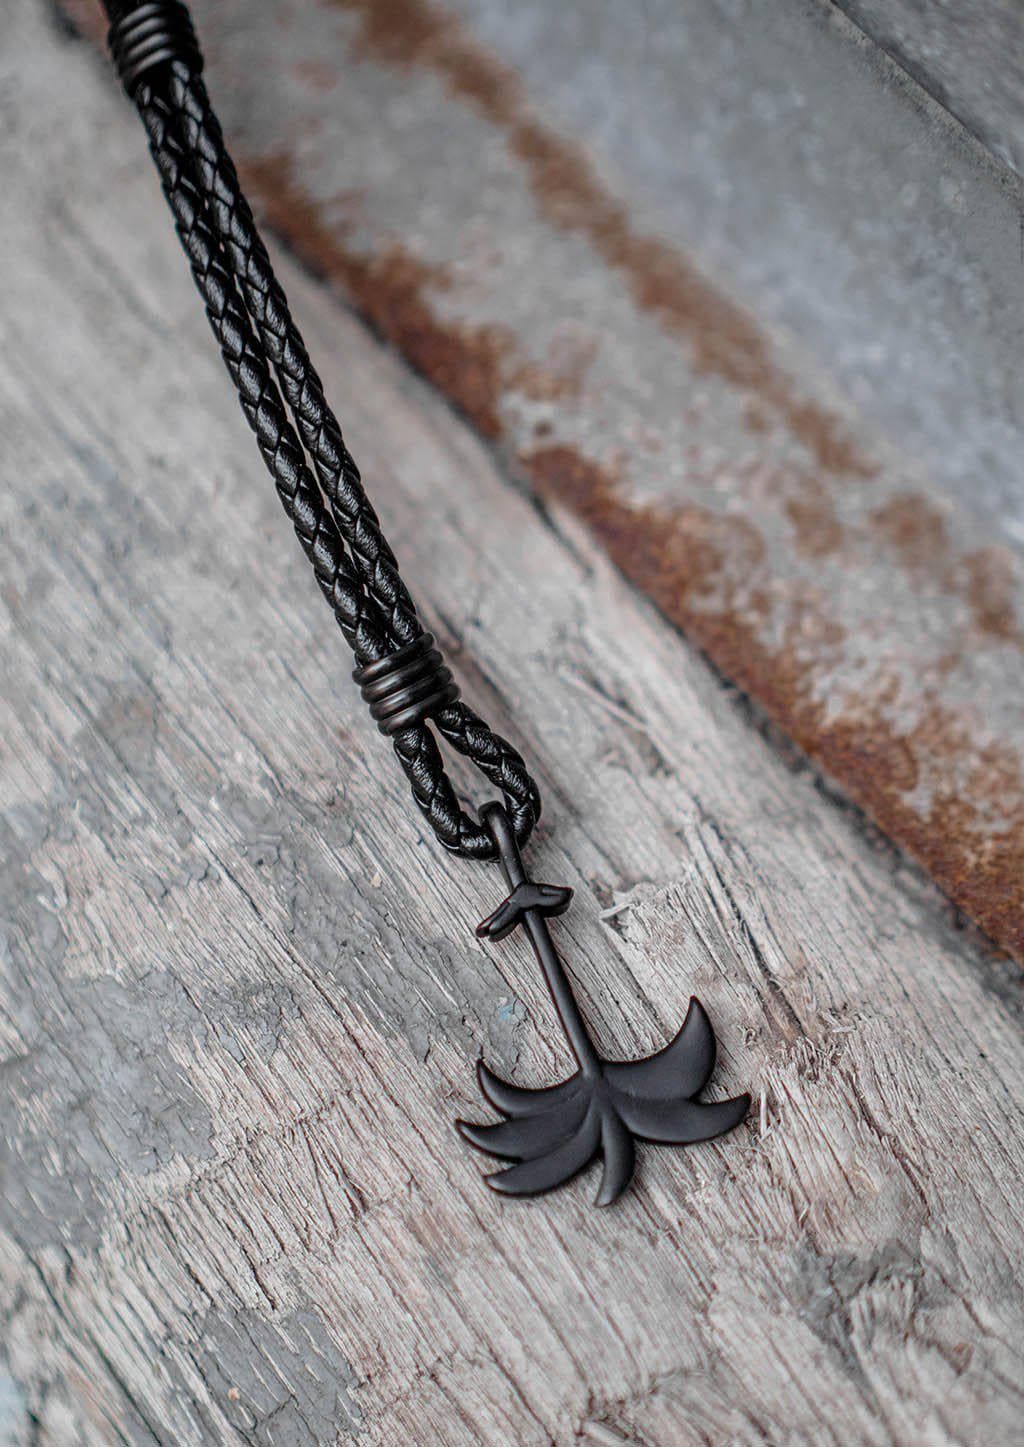 Pitch Black - Palm anchor bracelet with black leather. Outside shoot.